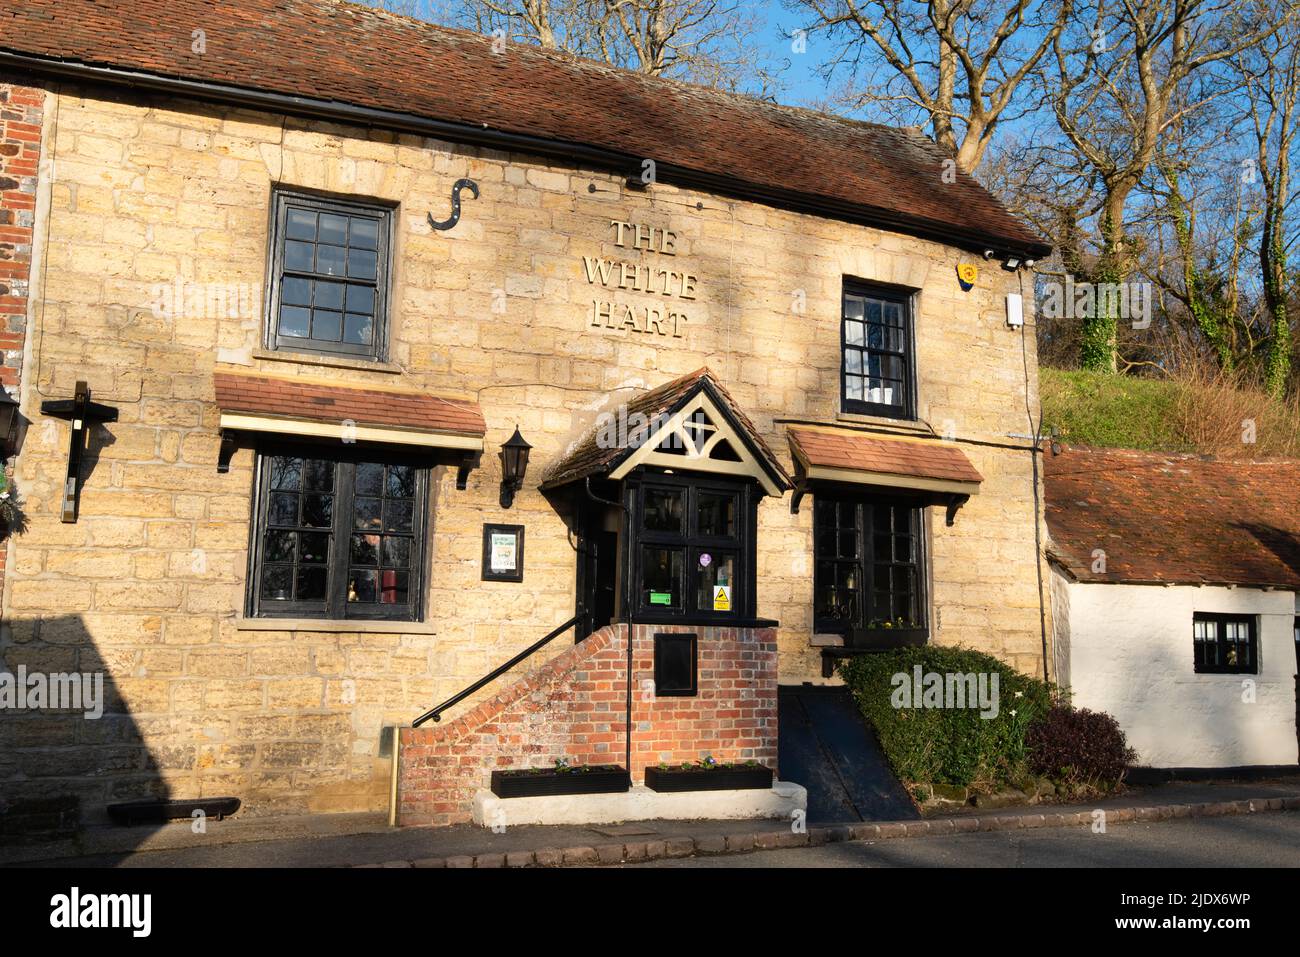 The White Hart public house which stands beside Stopham Bridge across the River Arun near Pulborough, West Sussex, England, UK Stock Photo